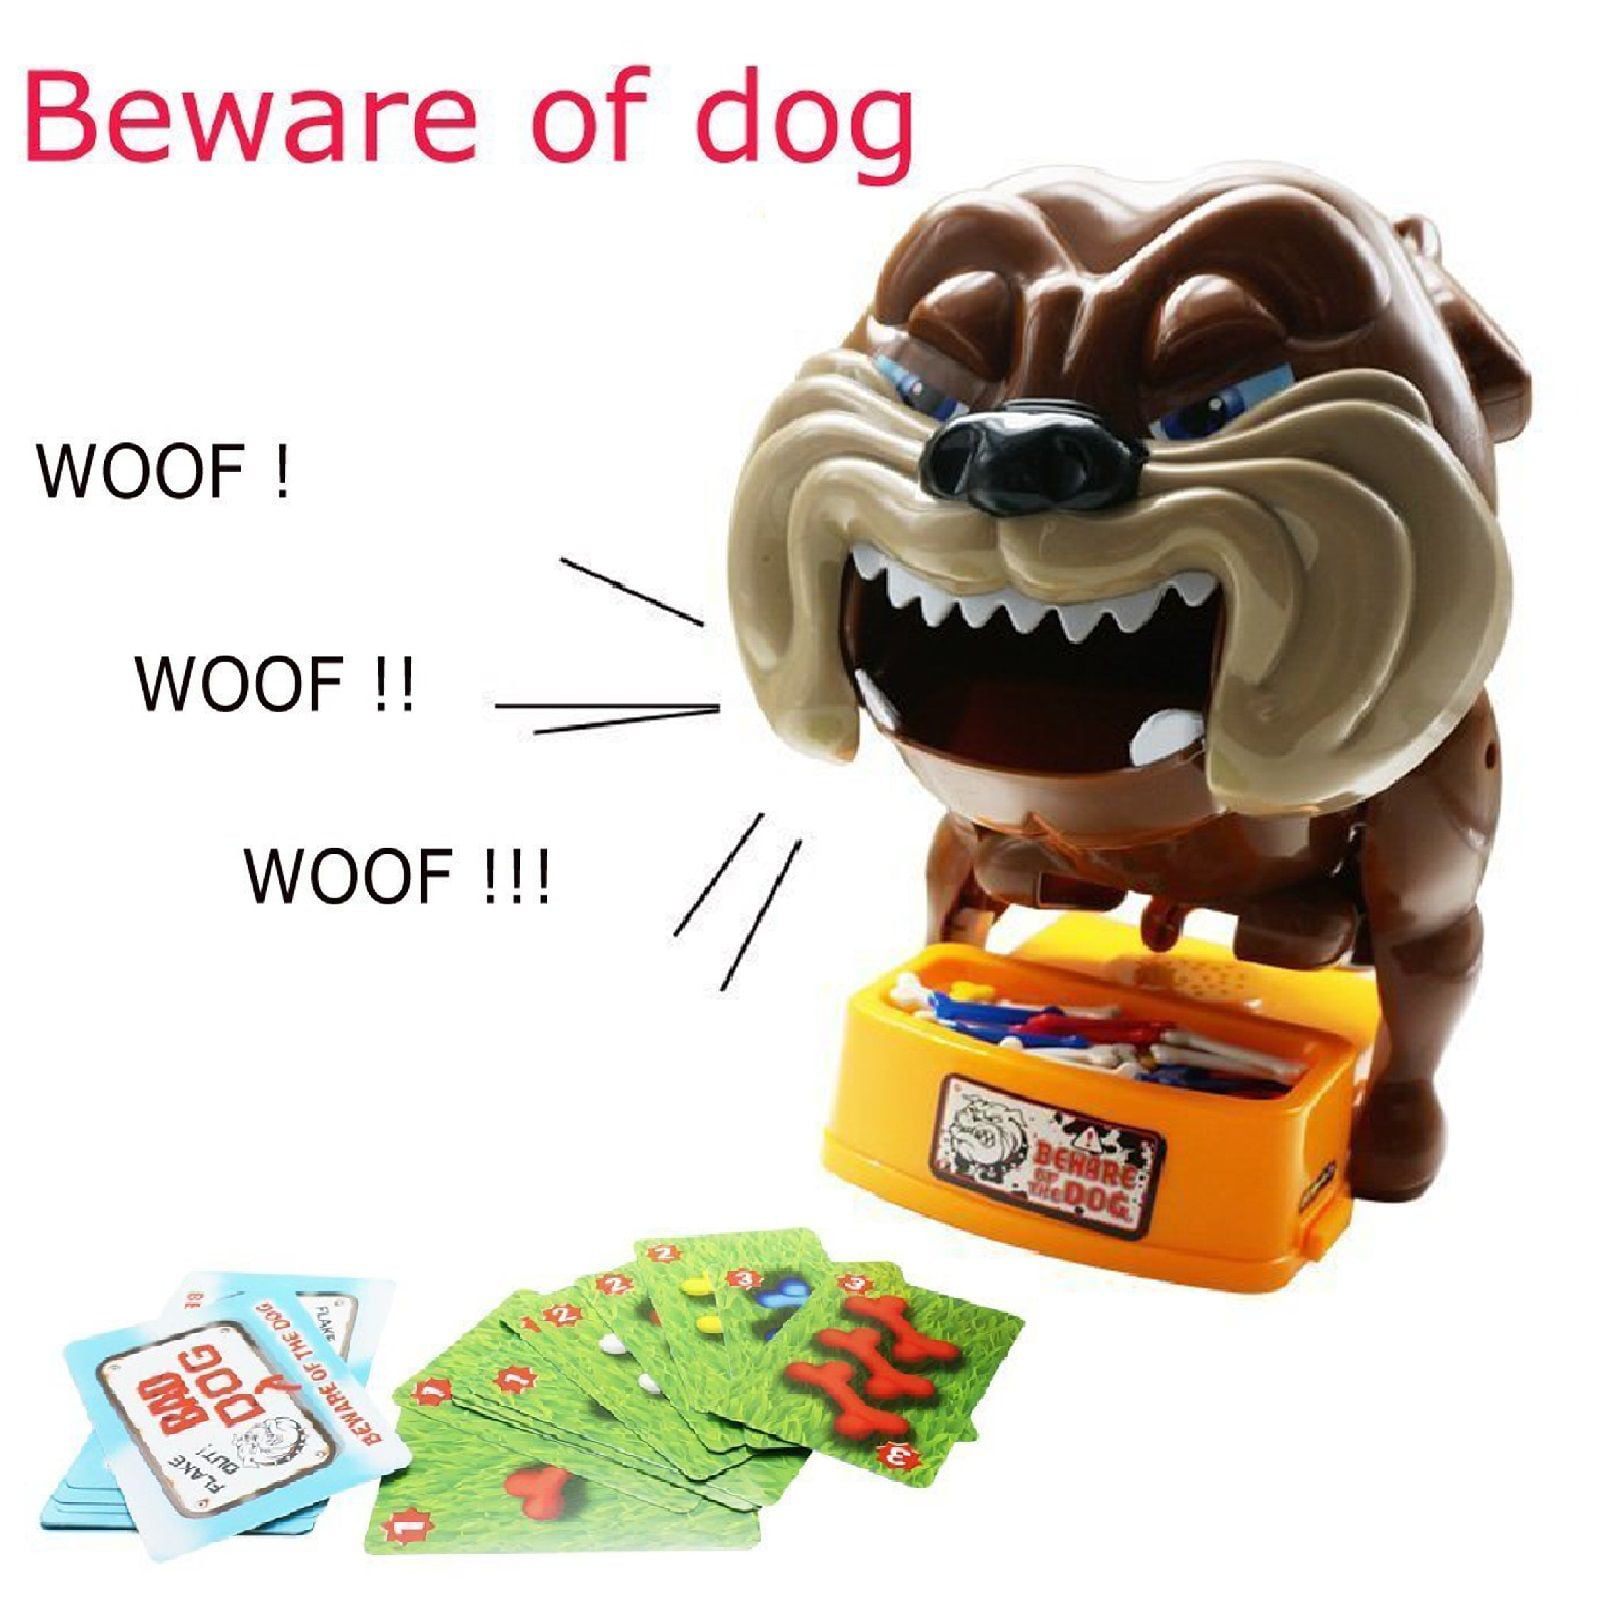 Bad Dog Toy Flake Out Bones Tricky Games Parent-child Creative Educational Toy@ 